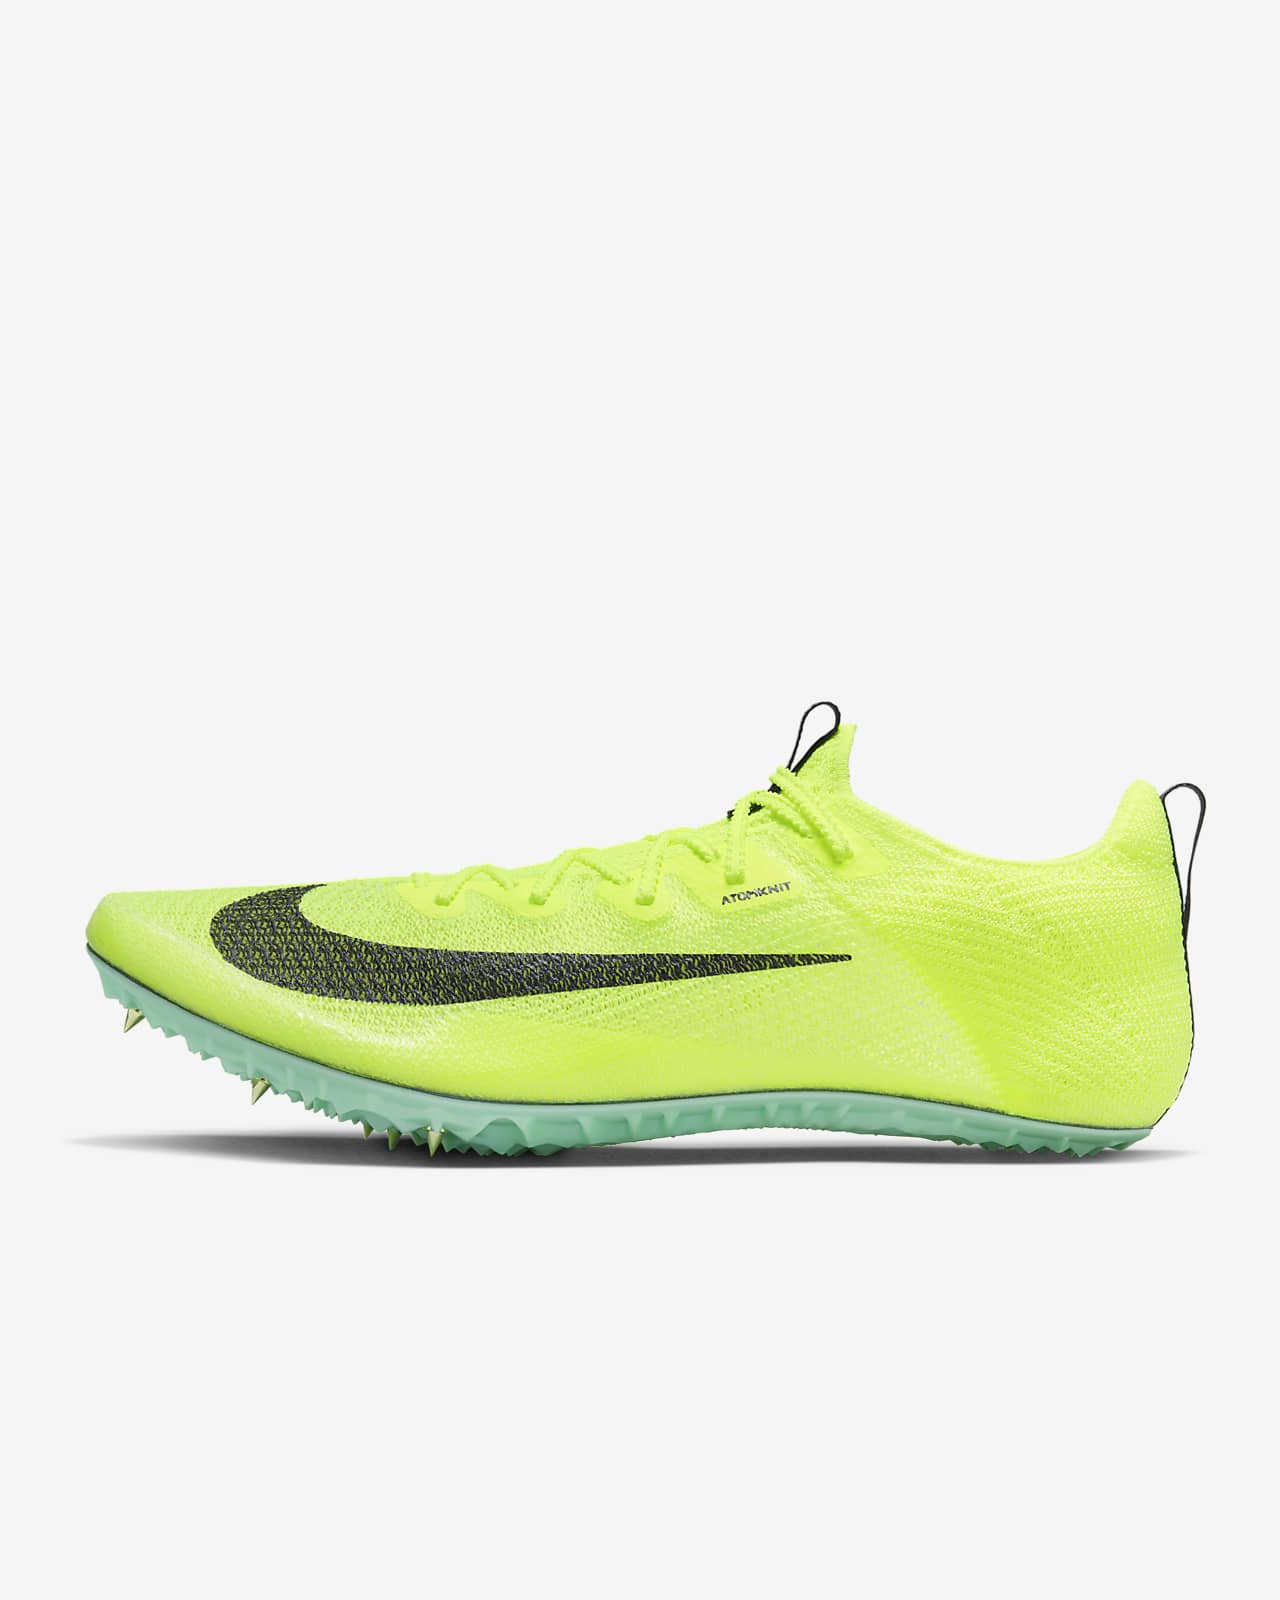 Nike Zoom Superfly Elite 2 Track and field sprinting spikes